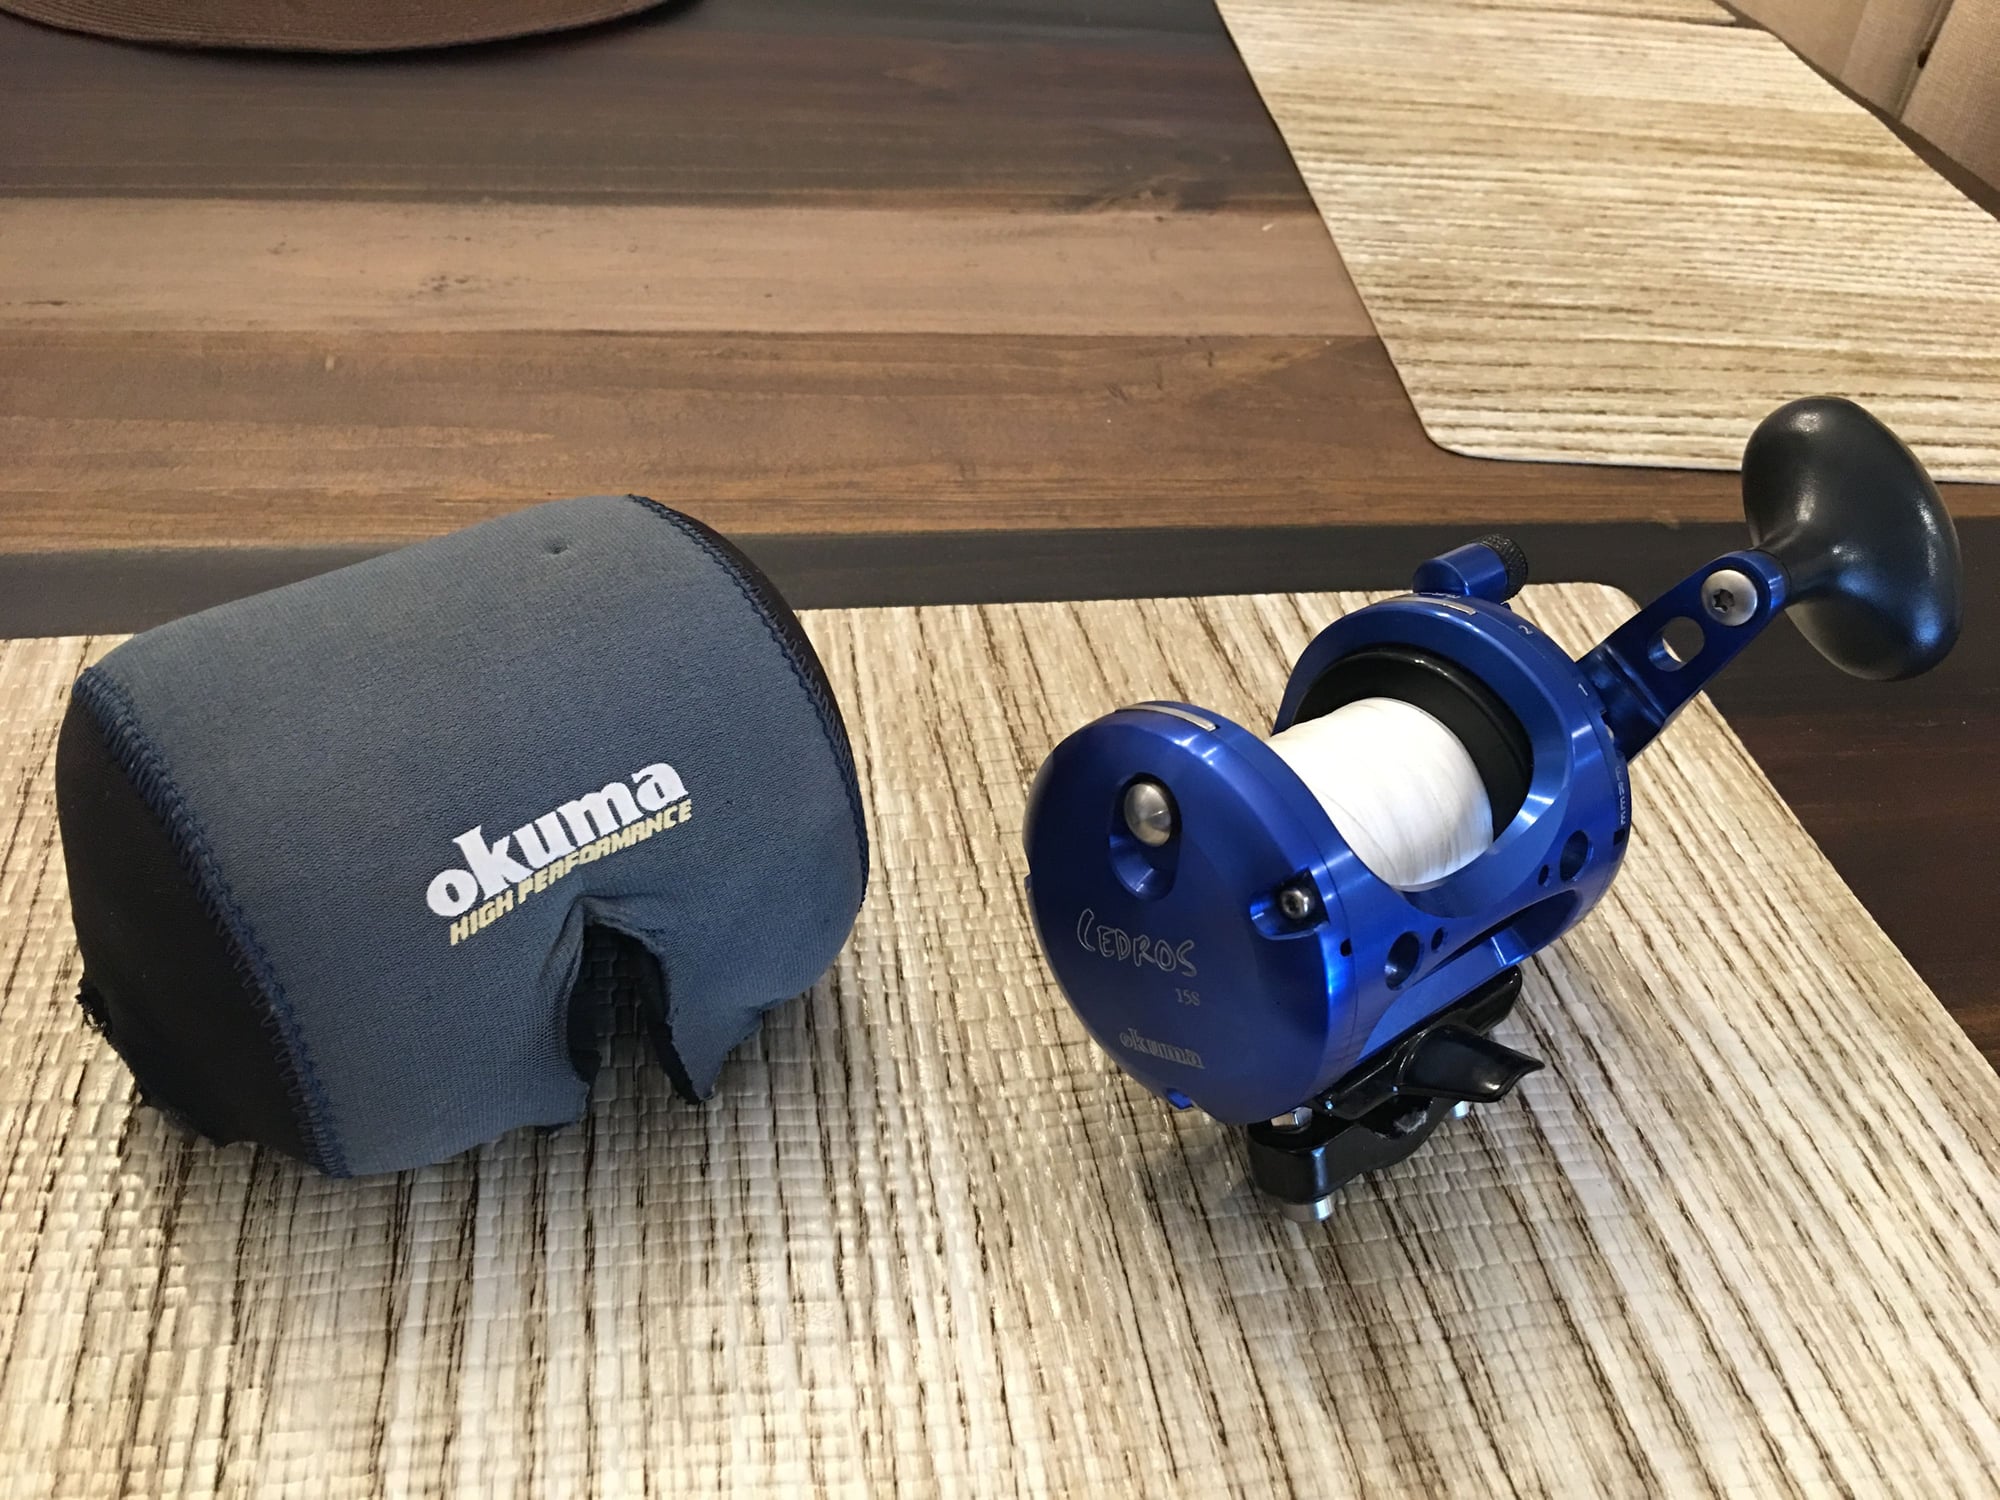 Okuma cedros 15s lever drag conventional reel - The Hull Truth - Boating  and Fishing Forum